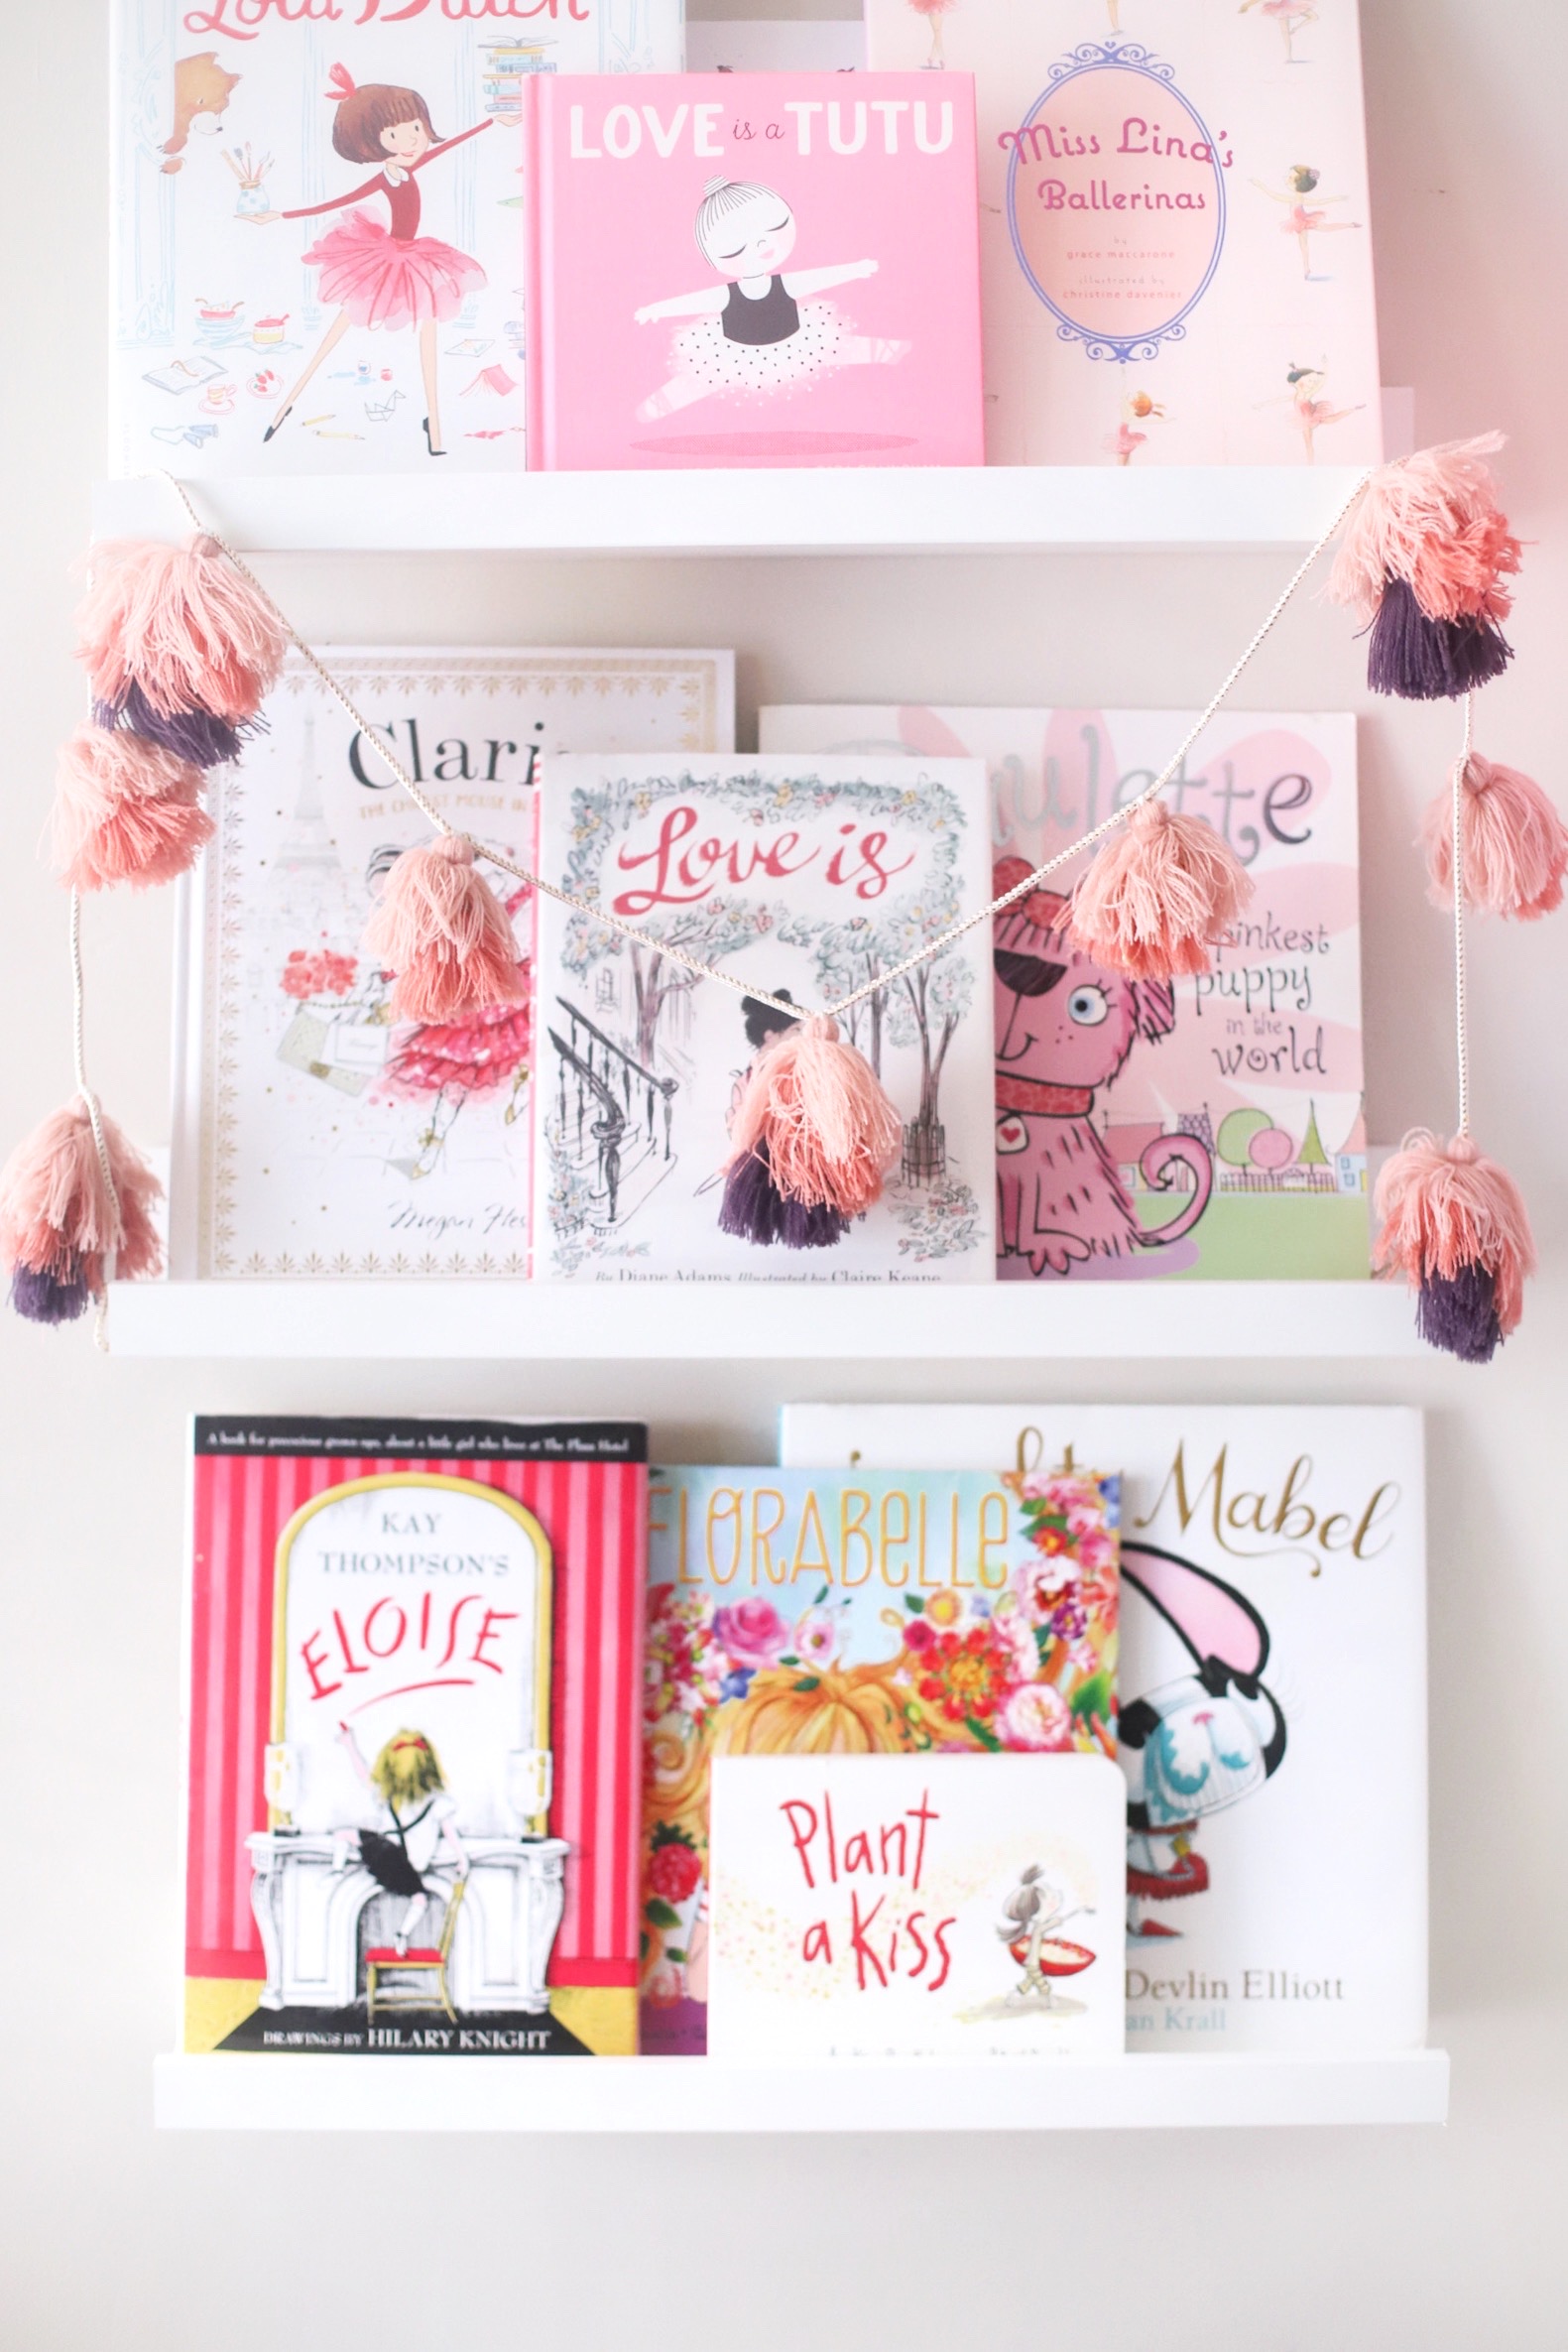 Celebrate the month of love with our favorite kids books for Valentine's Day! These adorable books are fun for the whole family and are the perfect books to read aloud to your preschoolers and elementary schoolers! | glitterinc.com | @glitterinc